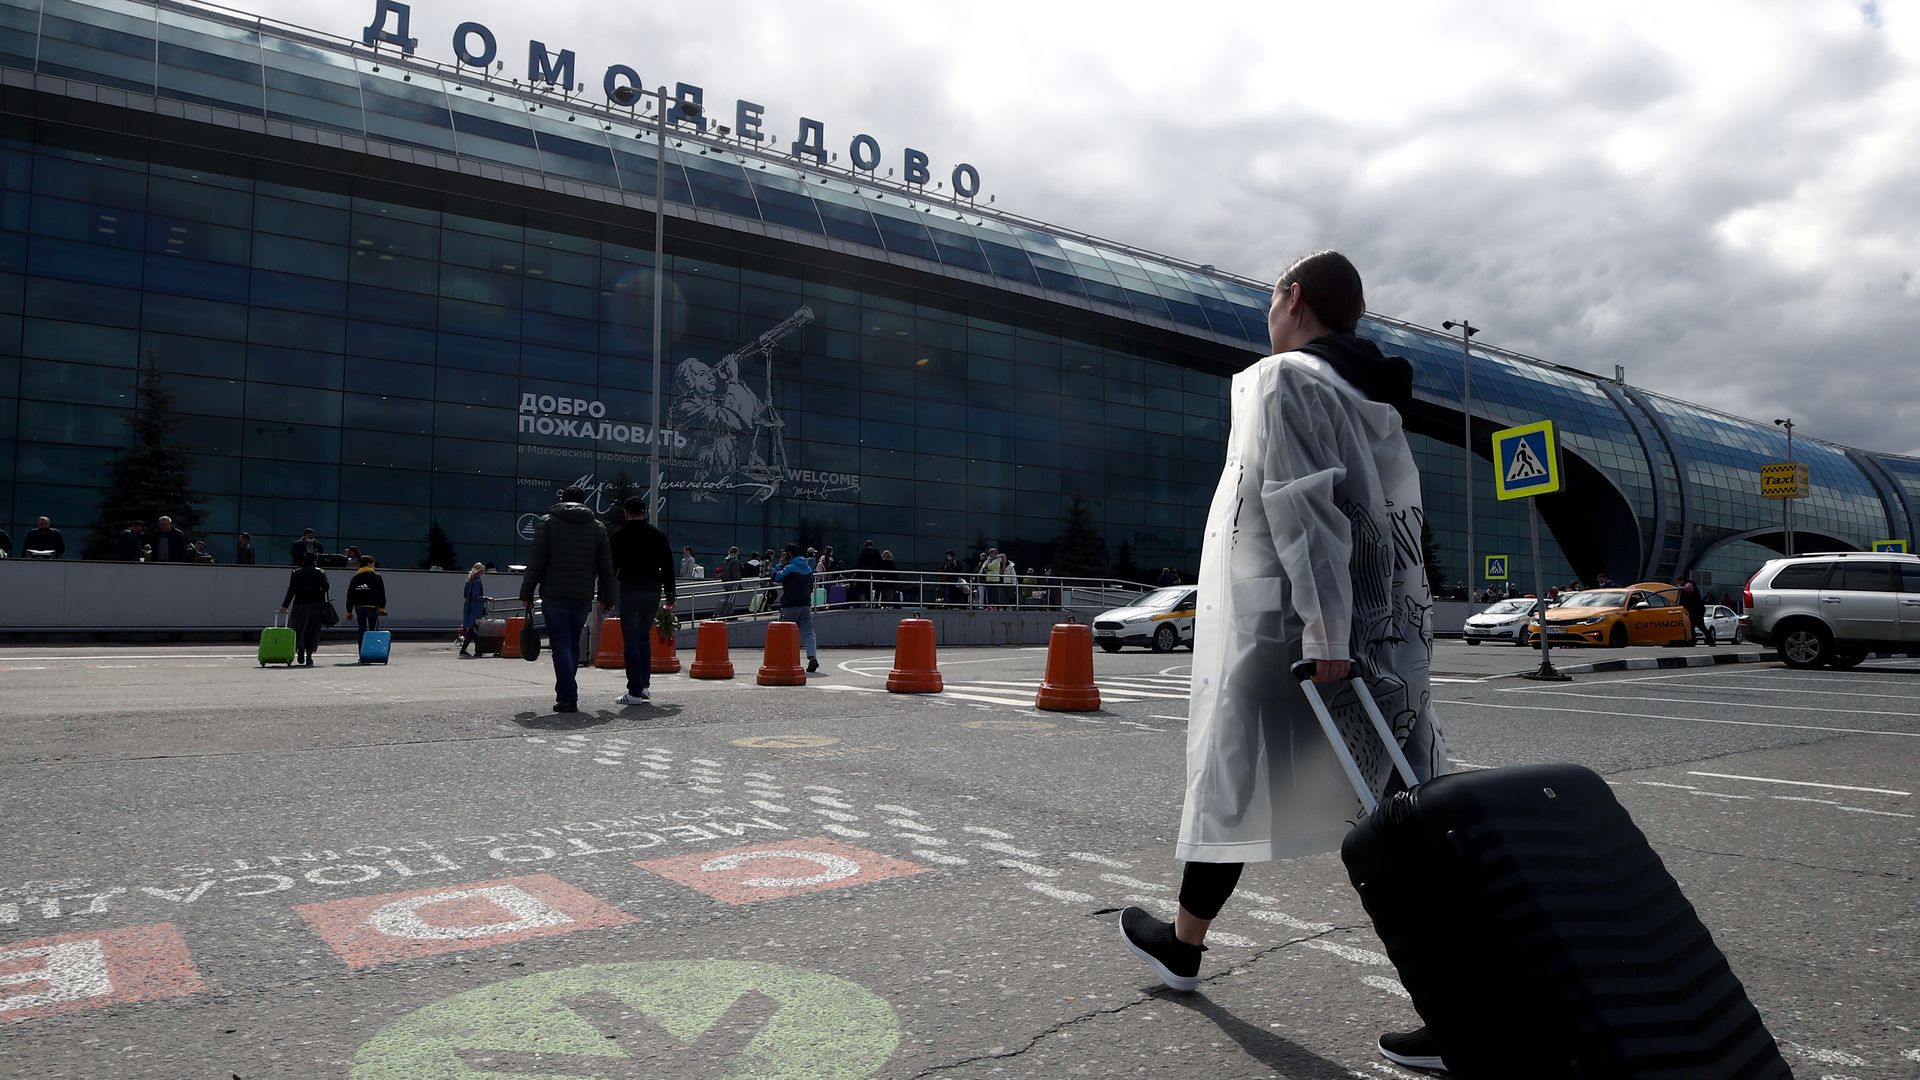 Travelers outside of the Domodedovo Airport outside of Moscow in April 2021.